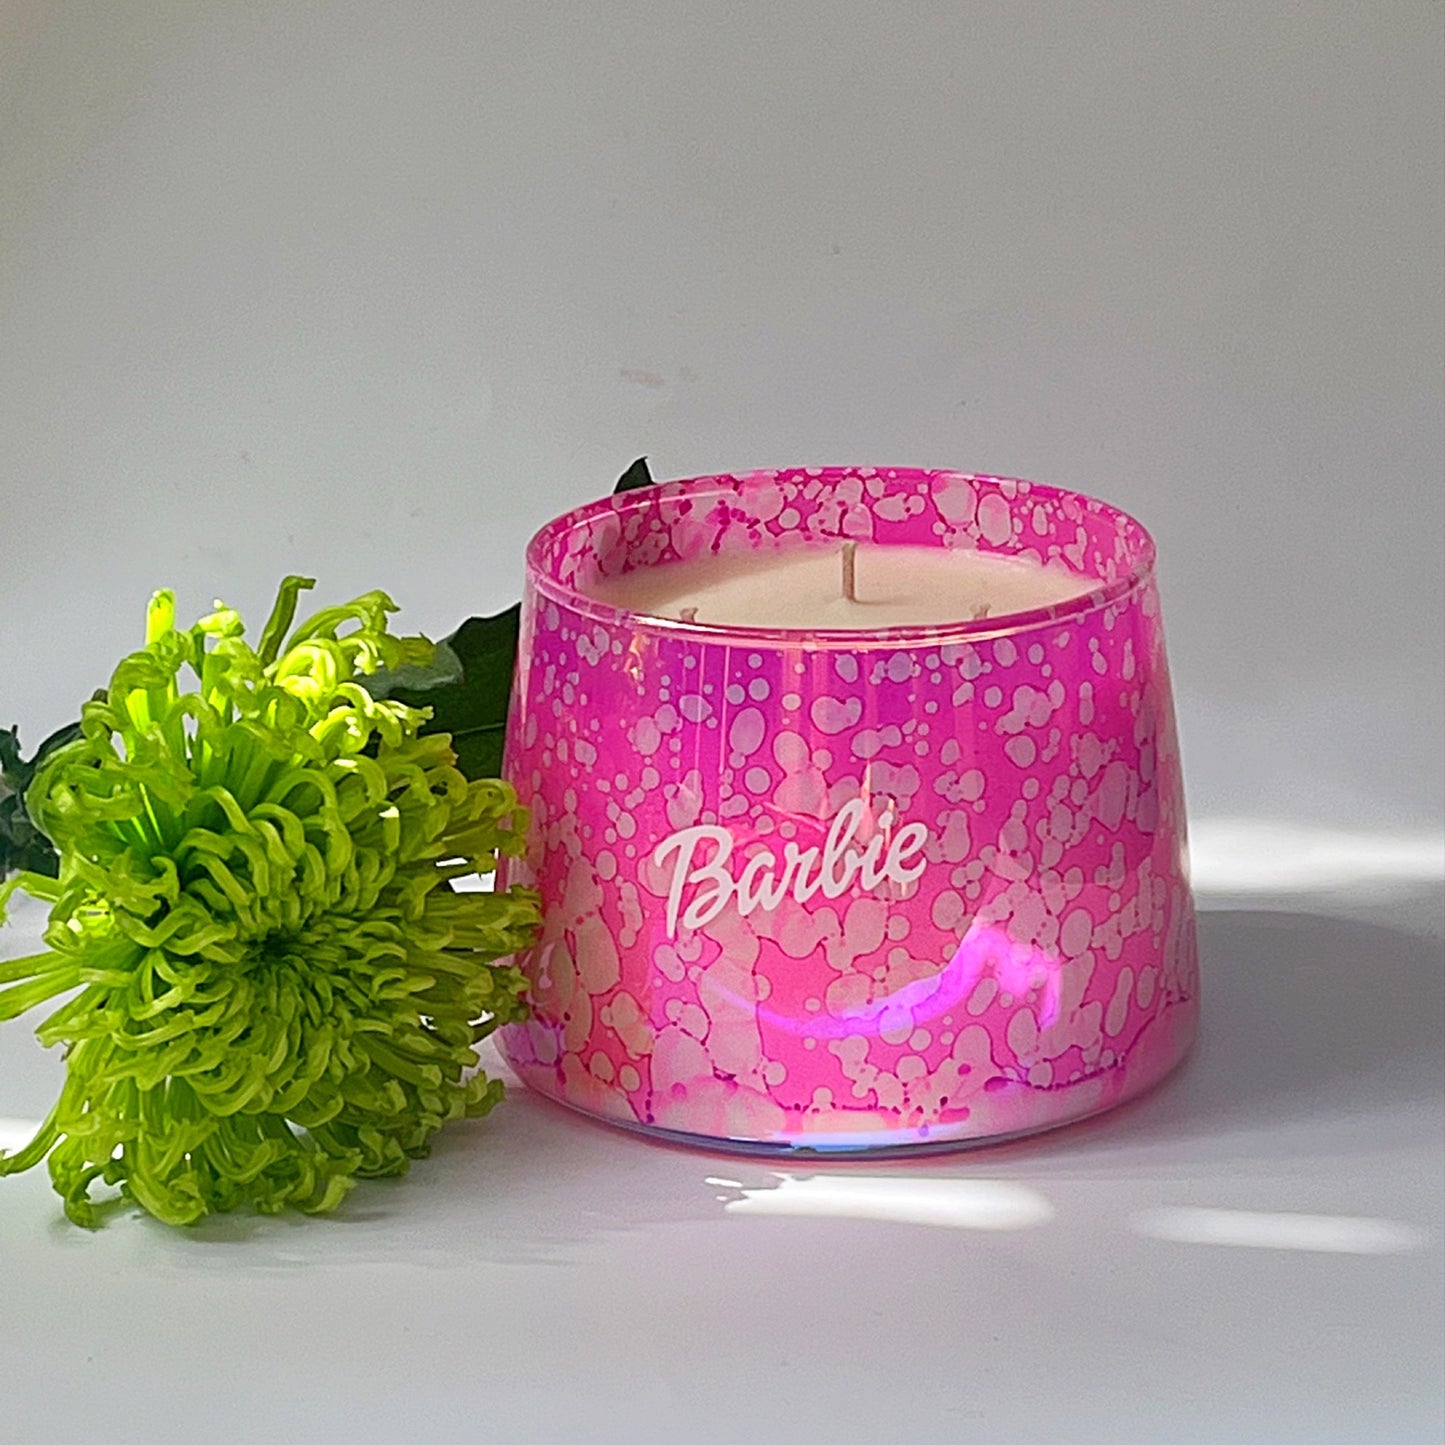 Limited Edition Barbie Candle